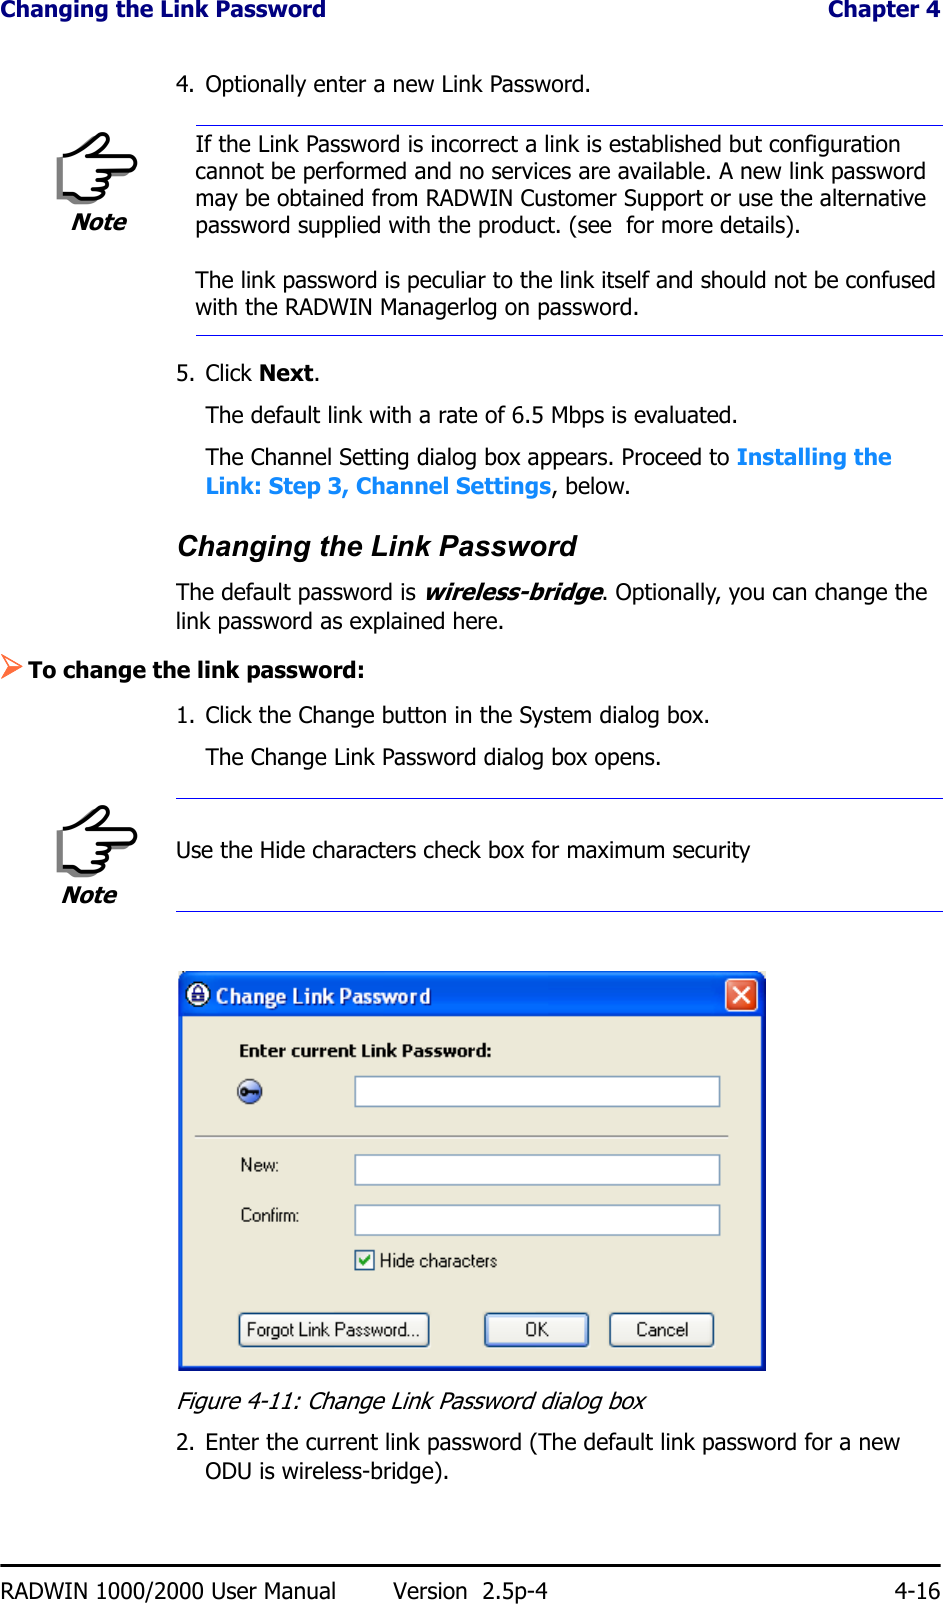 Changing the Link Password  Chapter 4RADWIN 1000/2000 User Manual Version  2.5p-4 4-164. Optionally enter a new Link Password. 5. Click Next.The default link with a rate of 6.5 Mbps is evaluated.The Channel Setting dialog box appears. Proceed to Installing the Link: Step 3, Channel Settings, below.Changing the Link PasswordThe default password is wireless-bridge. Optionally, you can change the link password as explained here.¾To change the link password:1. Click the Change button in the System dialog box.The Change Link Password dialog box opens.Figure 4-11: Change Link Password dialog box2. Enter the current link password (The default link password for a new ODU is wireless-bridge).NoteIf the Link Password is incorrect a link is established but configuration cannot be performed and no services are available. A new link password may be obtained from RADWIN Customer Support or use the alternative password supplied with the product. (see  for more details).The link password is peculiar to the link itself and should not be confused with the RADWIN Managerlog on password.NoteUse the Hide characters check box for maximum security